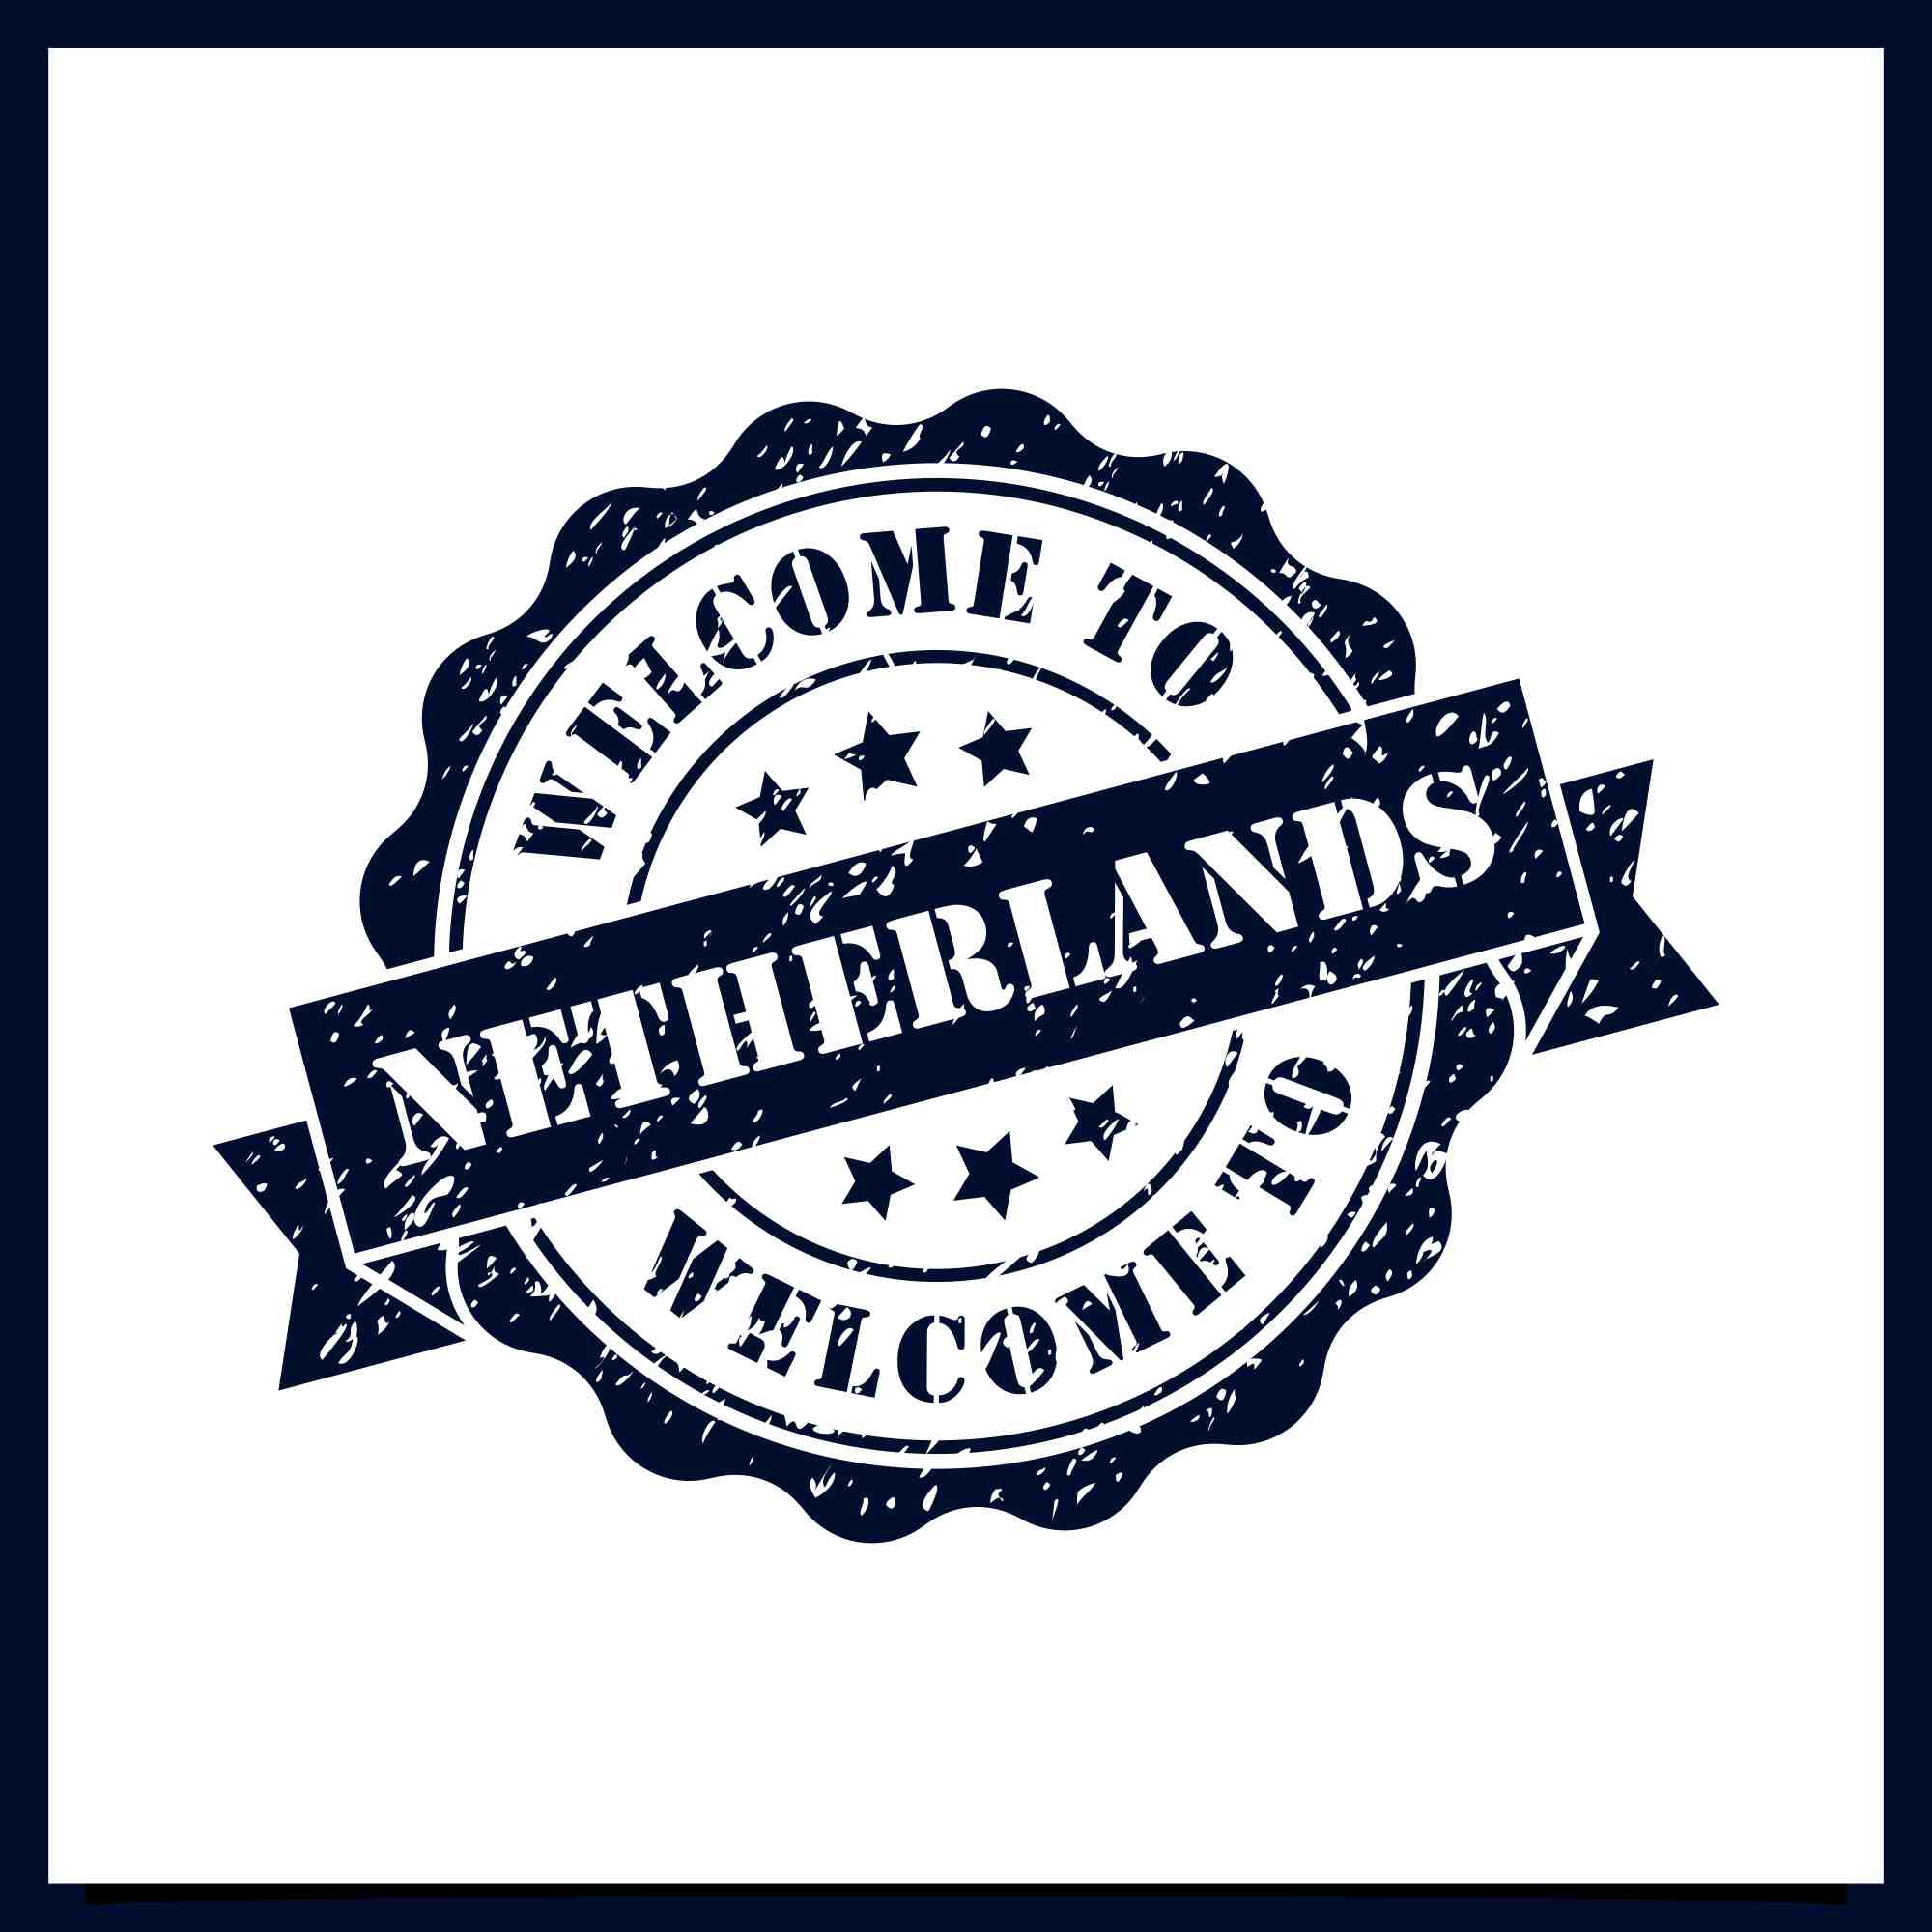 Welcome to Amsterdam Netherlands stamps logo design collection - $4 preview image.